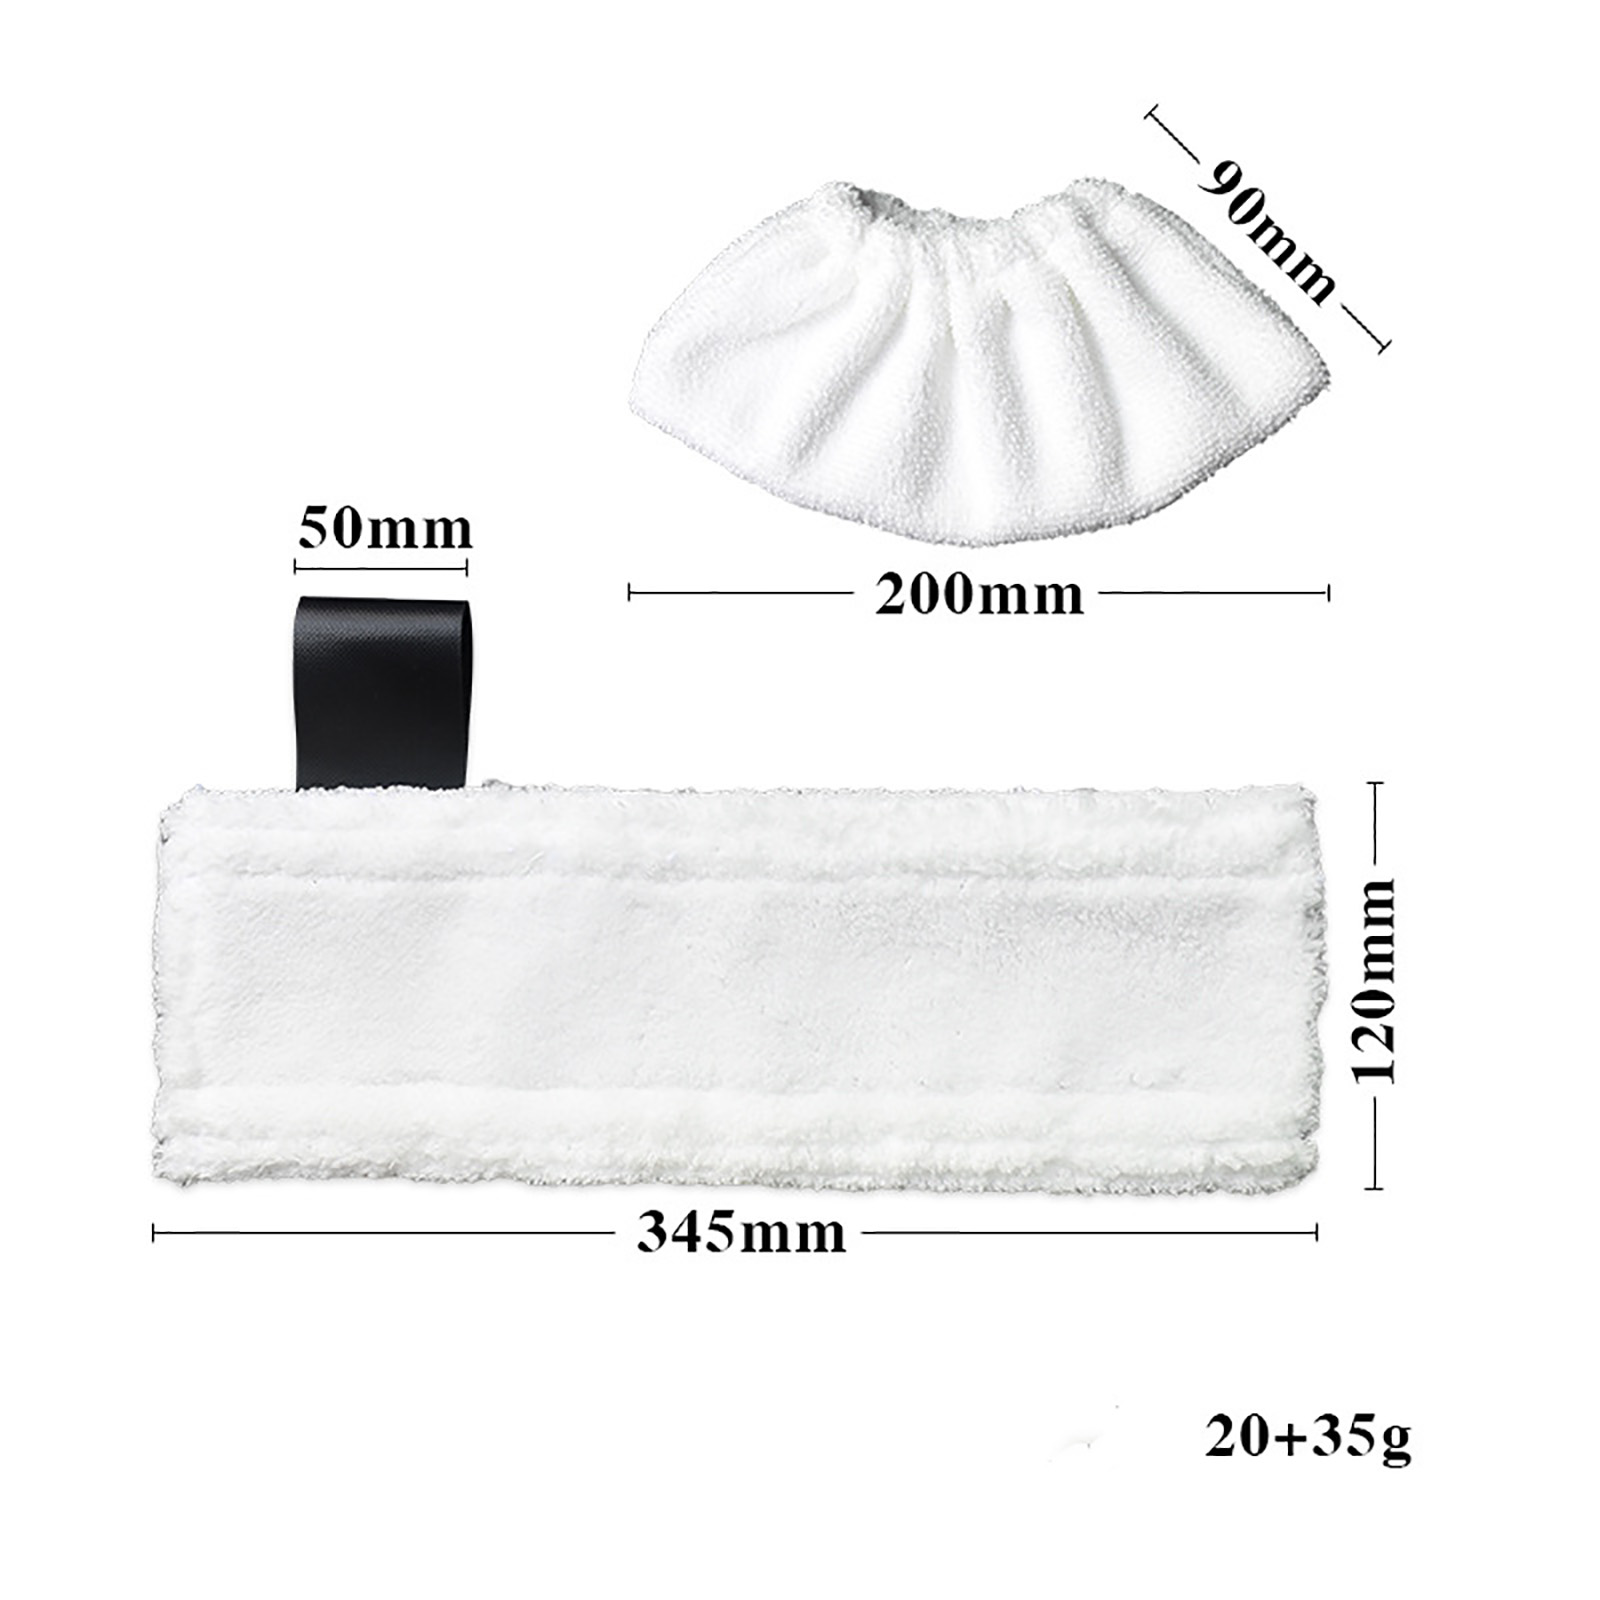 Replacement Steam Mop Cloth Cover Cleaning Pads Household Cloth Cover for Karcher SC2 SC3 SC4 SC5 Steam Mop Cleaner Parts